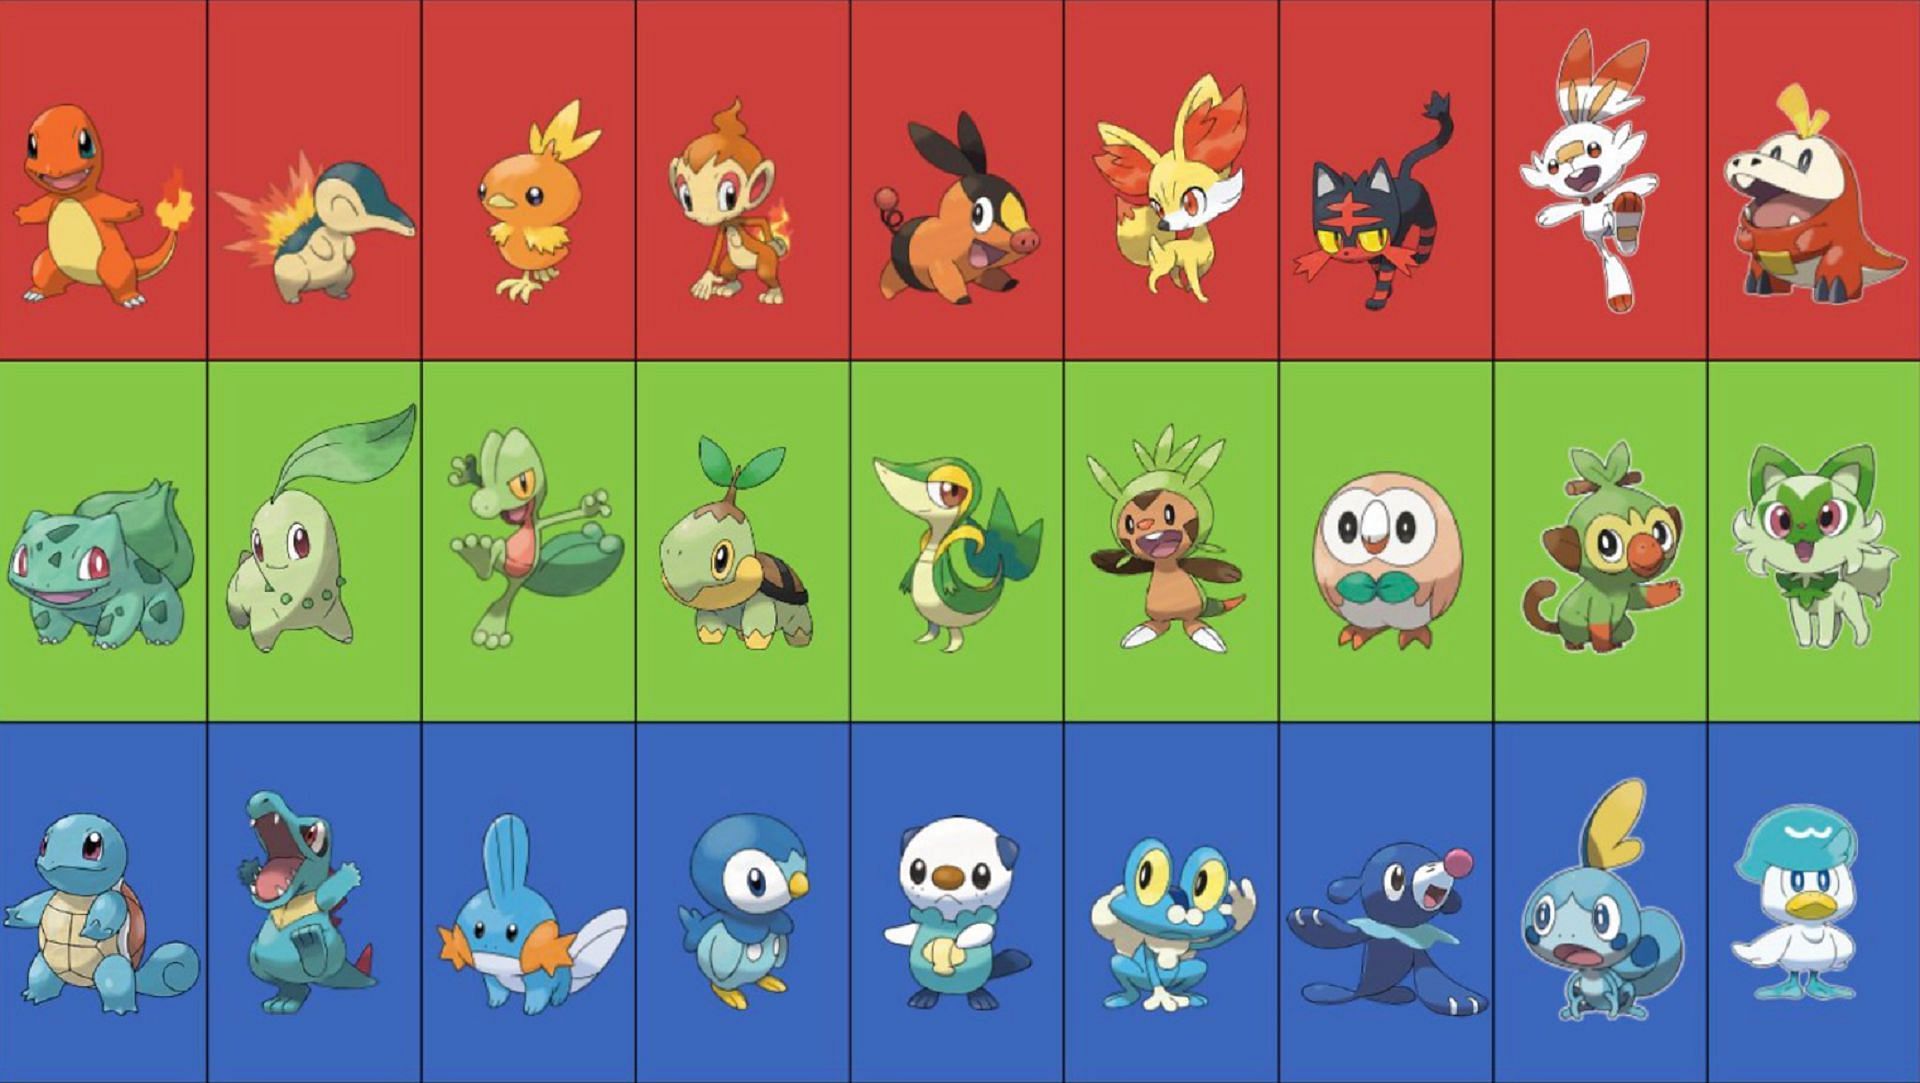 Is it just me or is the Include Pokémon from later generations